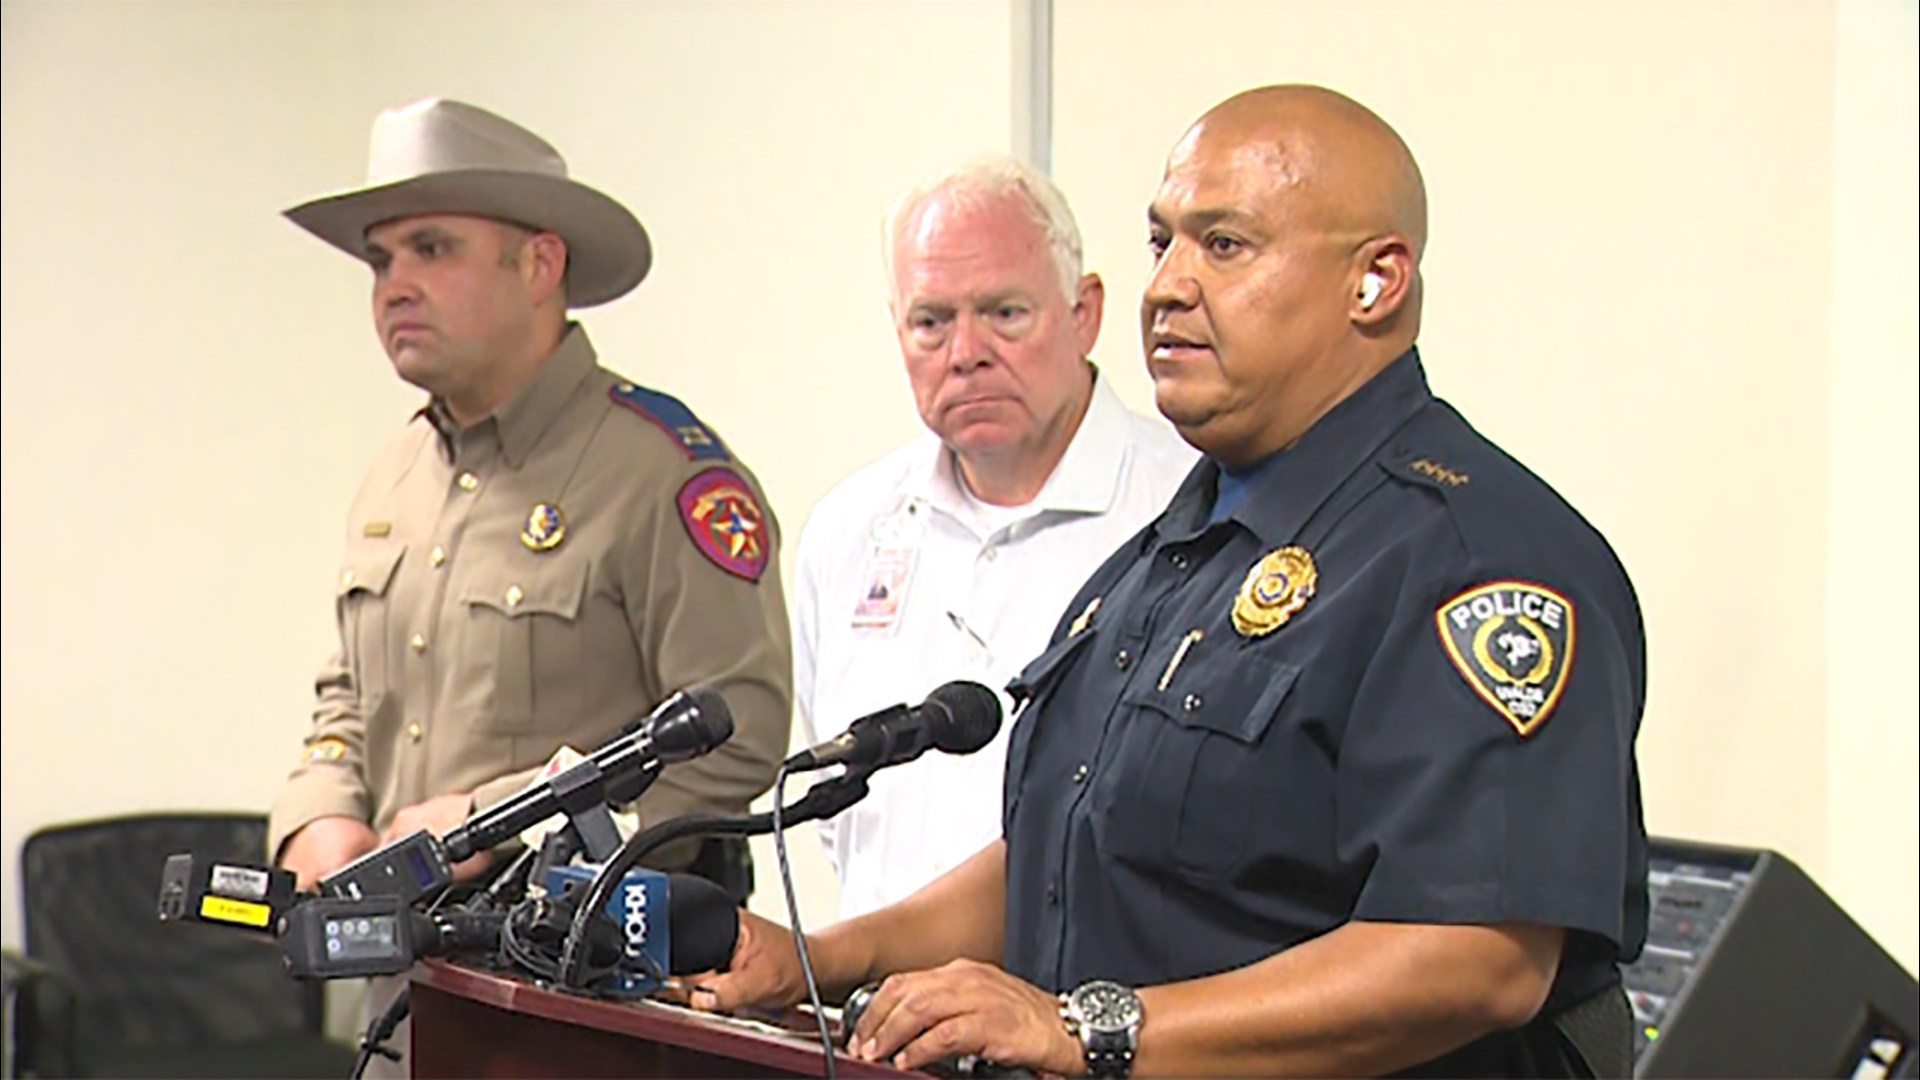 The Uvalde CISD Chief of Police confirmed Tuesday that 15 people were killed in a mass shooting at a Texas elementary school.